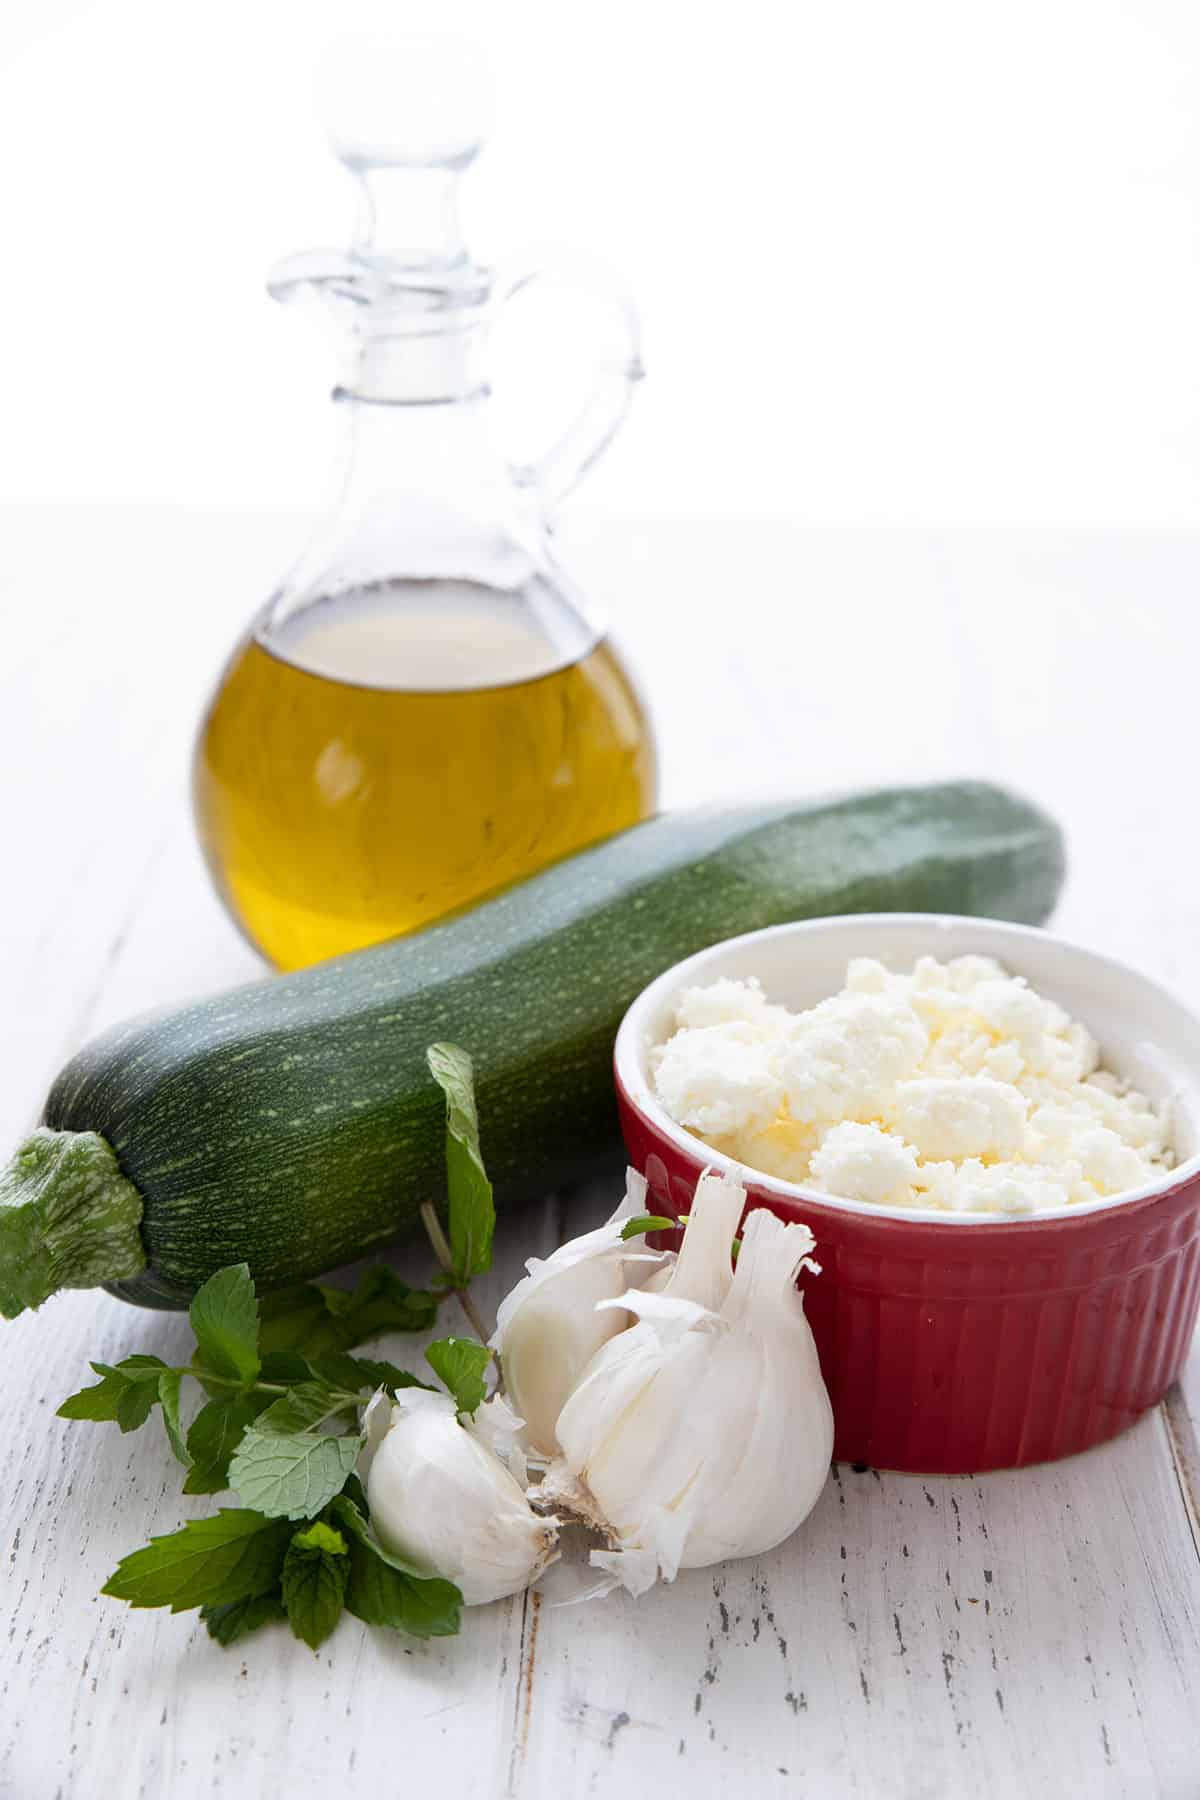 Ingredients for easy keto grilled zucchini with feta and mint.